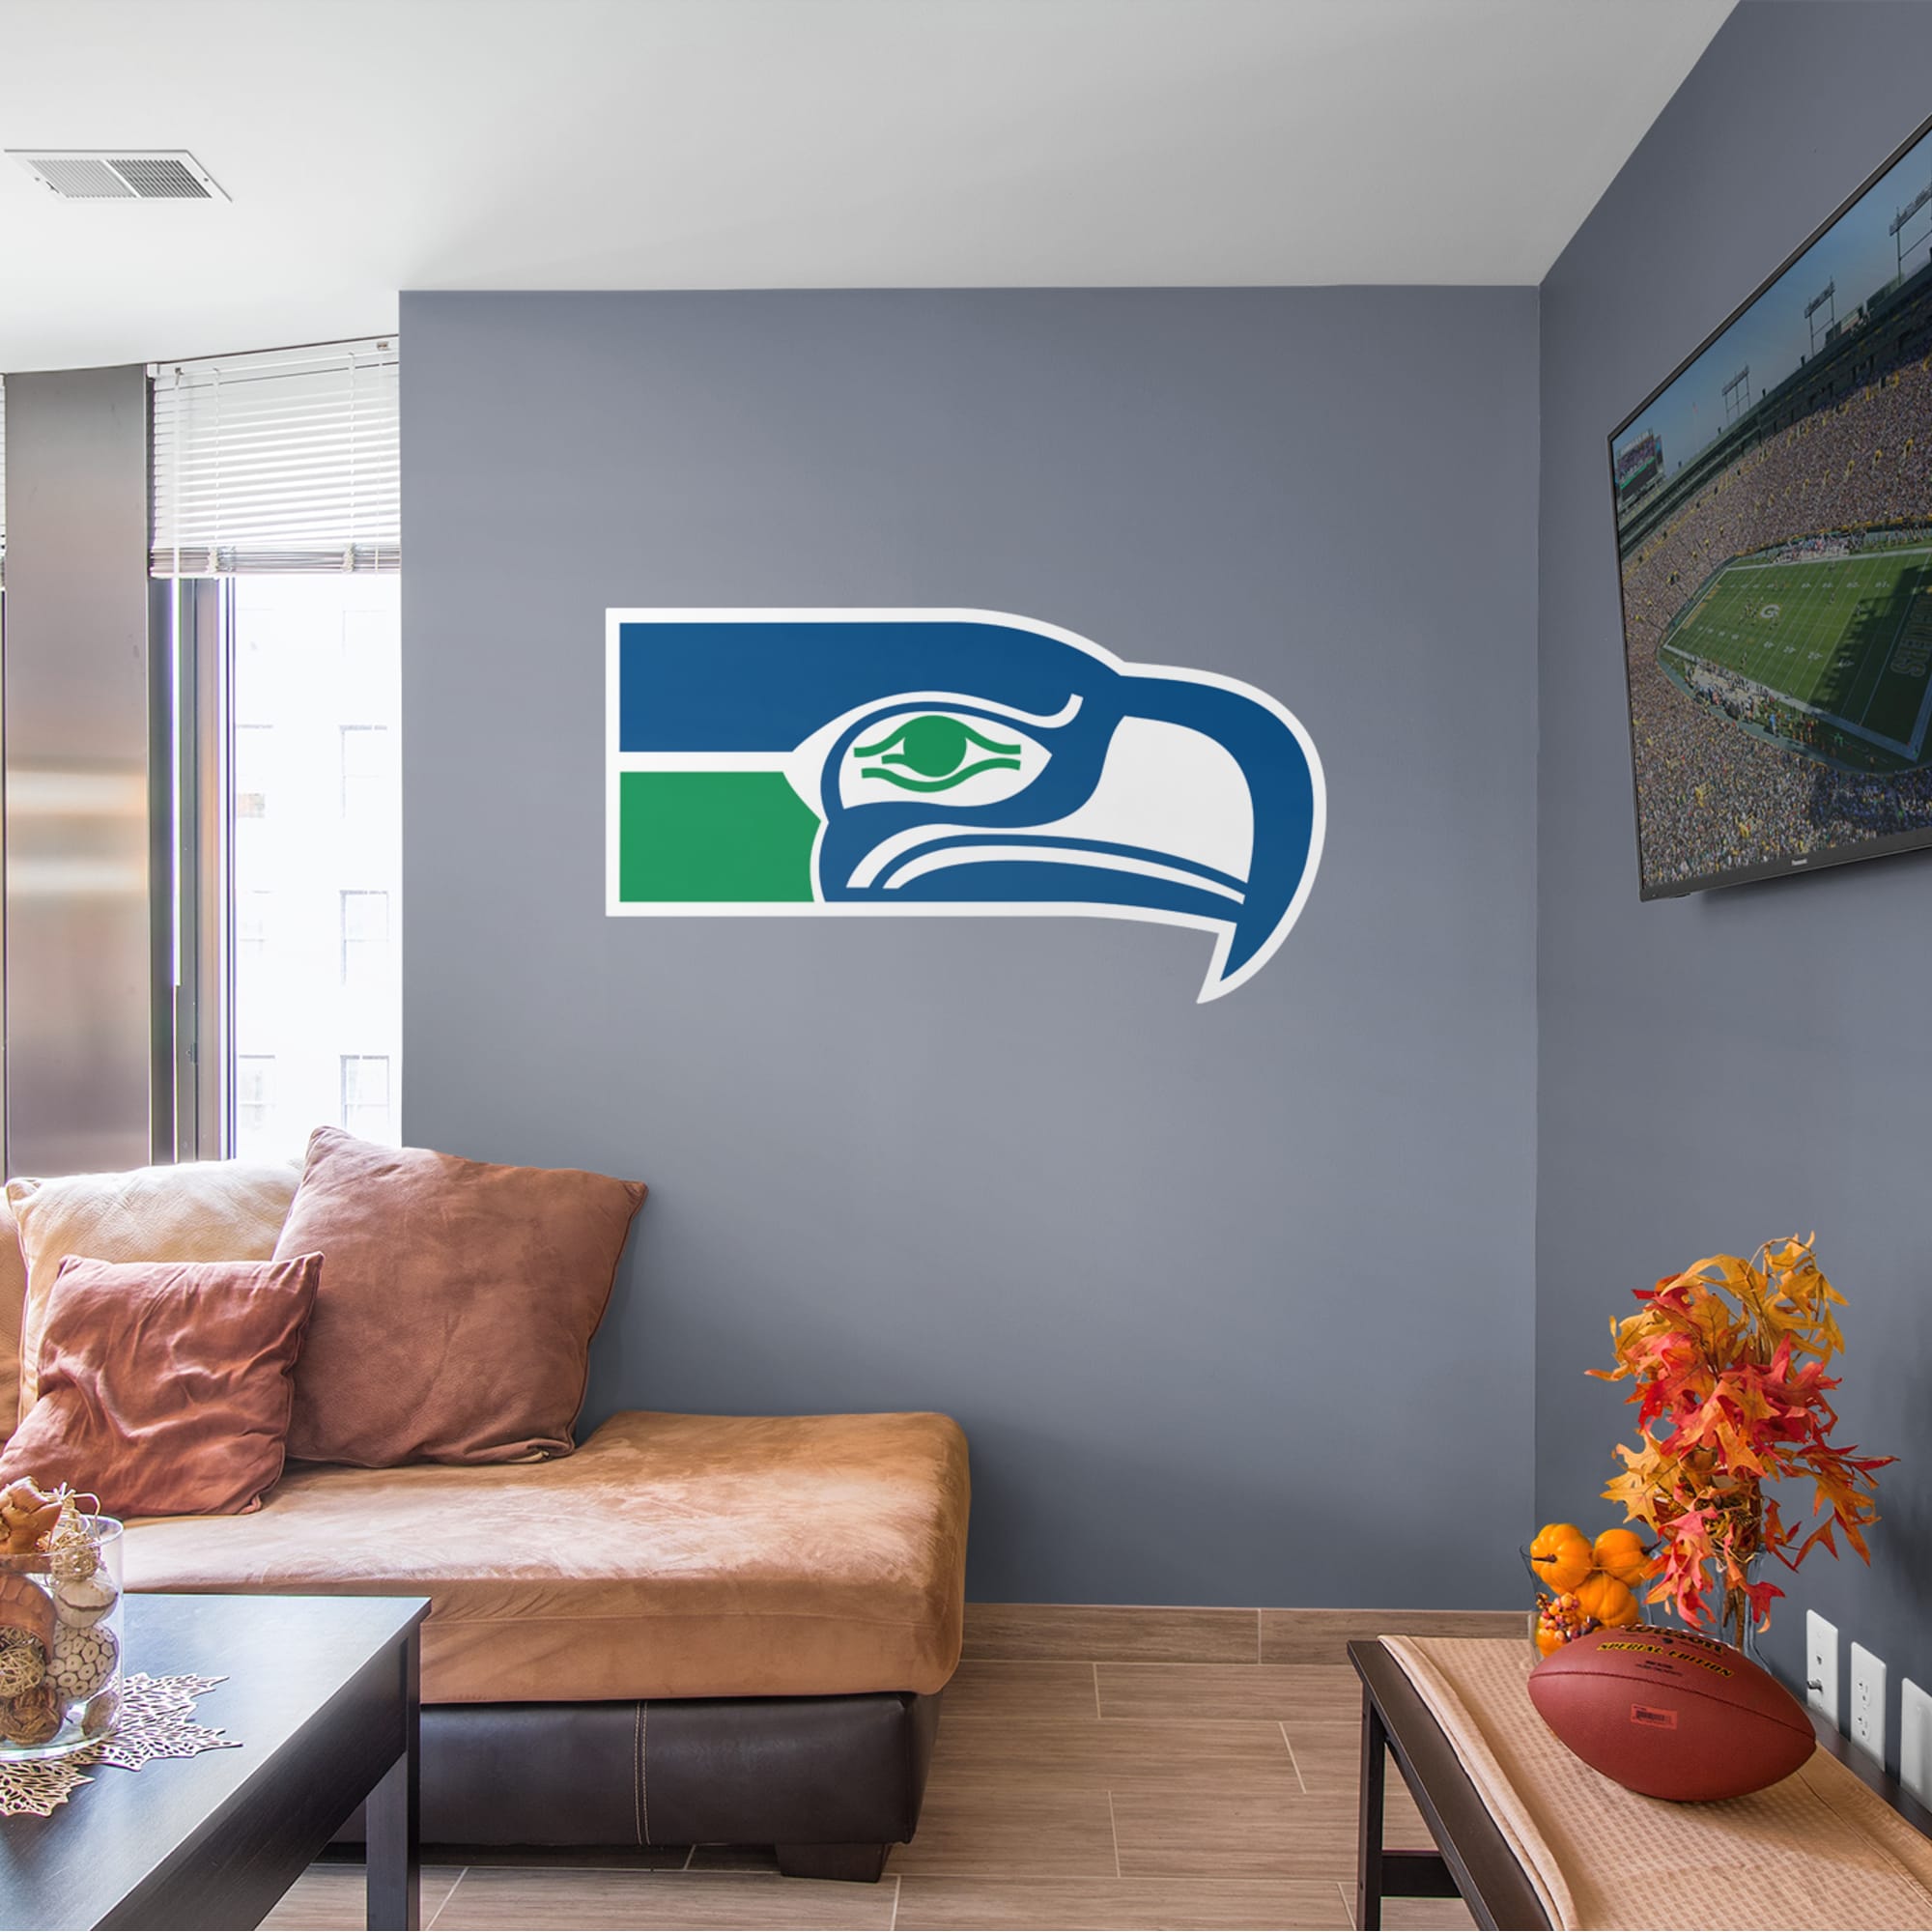 Seattle Seahawks: Classic Logo - Officially Licensed NFL Removable Wall Decal Giant Logo (51"W x 28"H) by Fathead | Vinyl